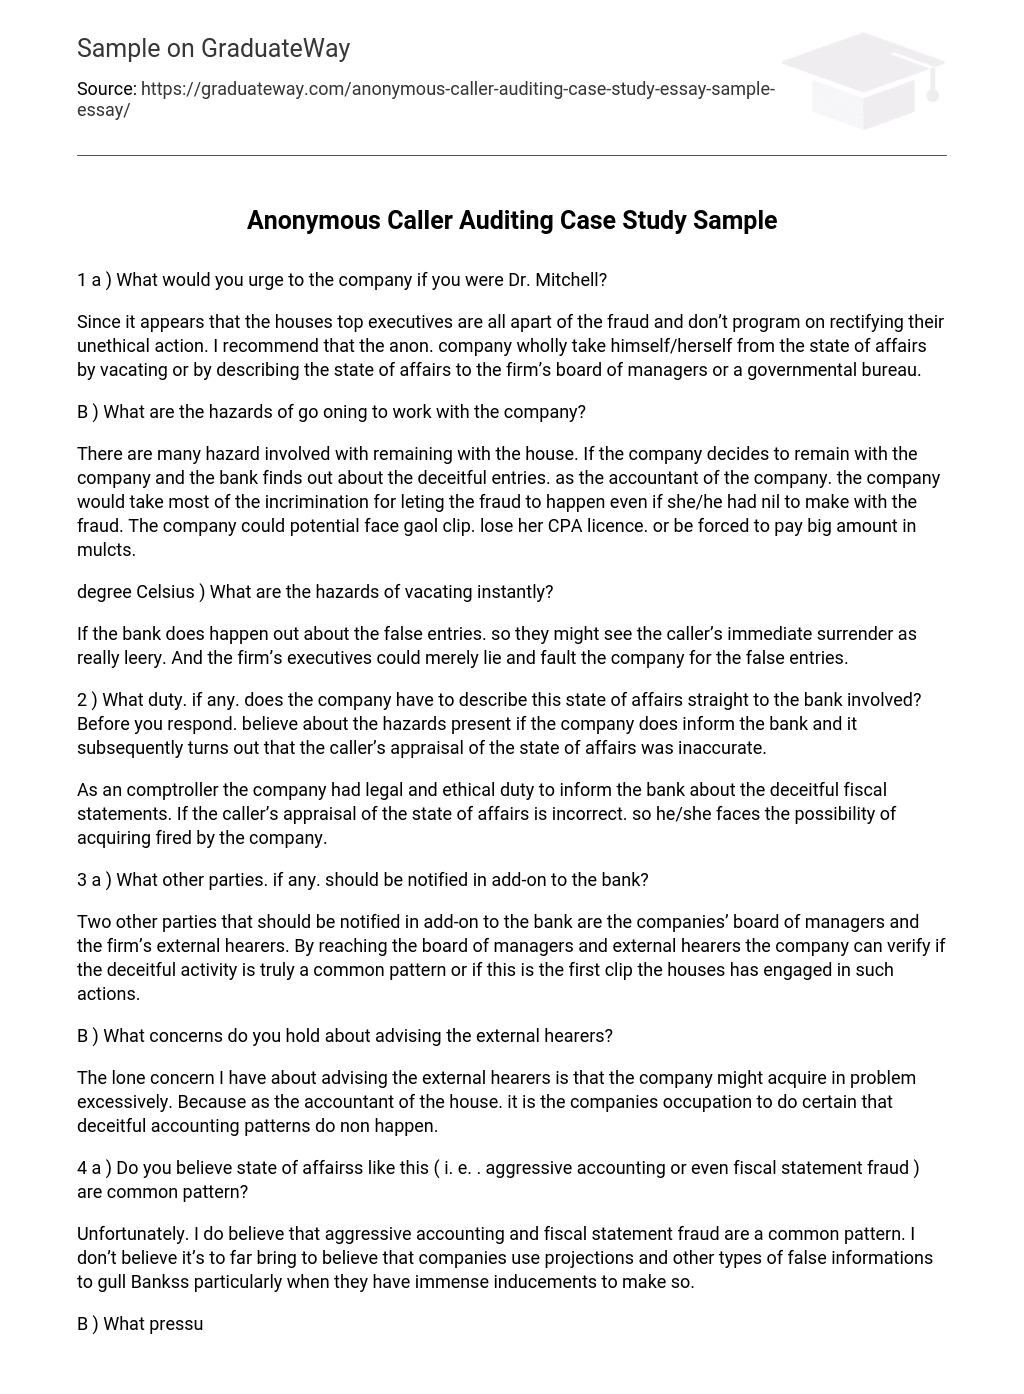 Anonymous Caller Auditing Case Study Sample